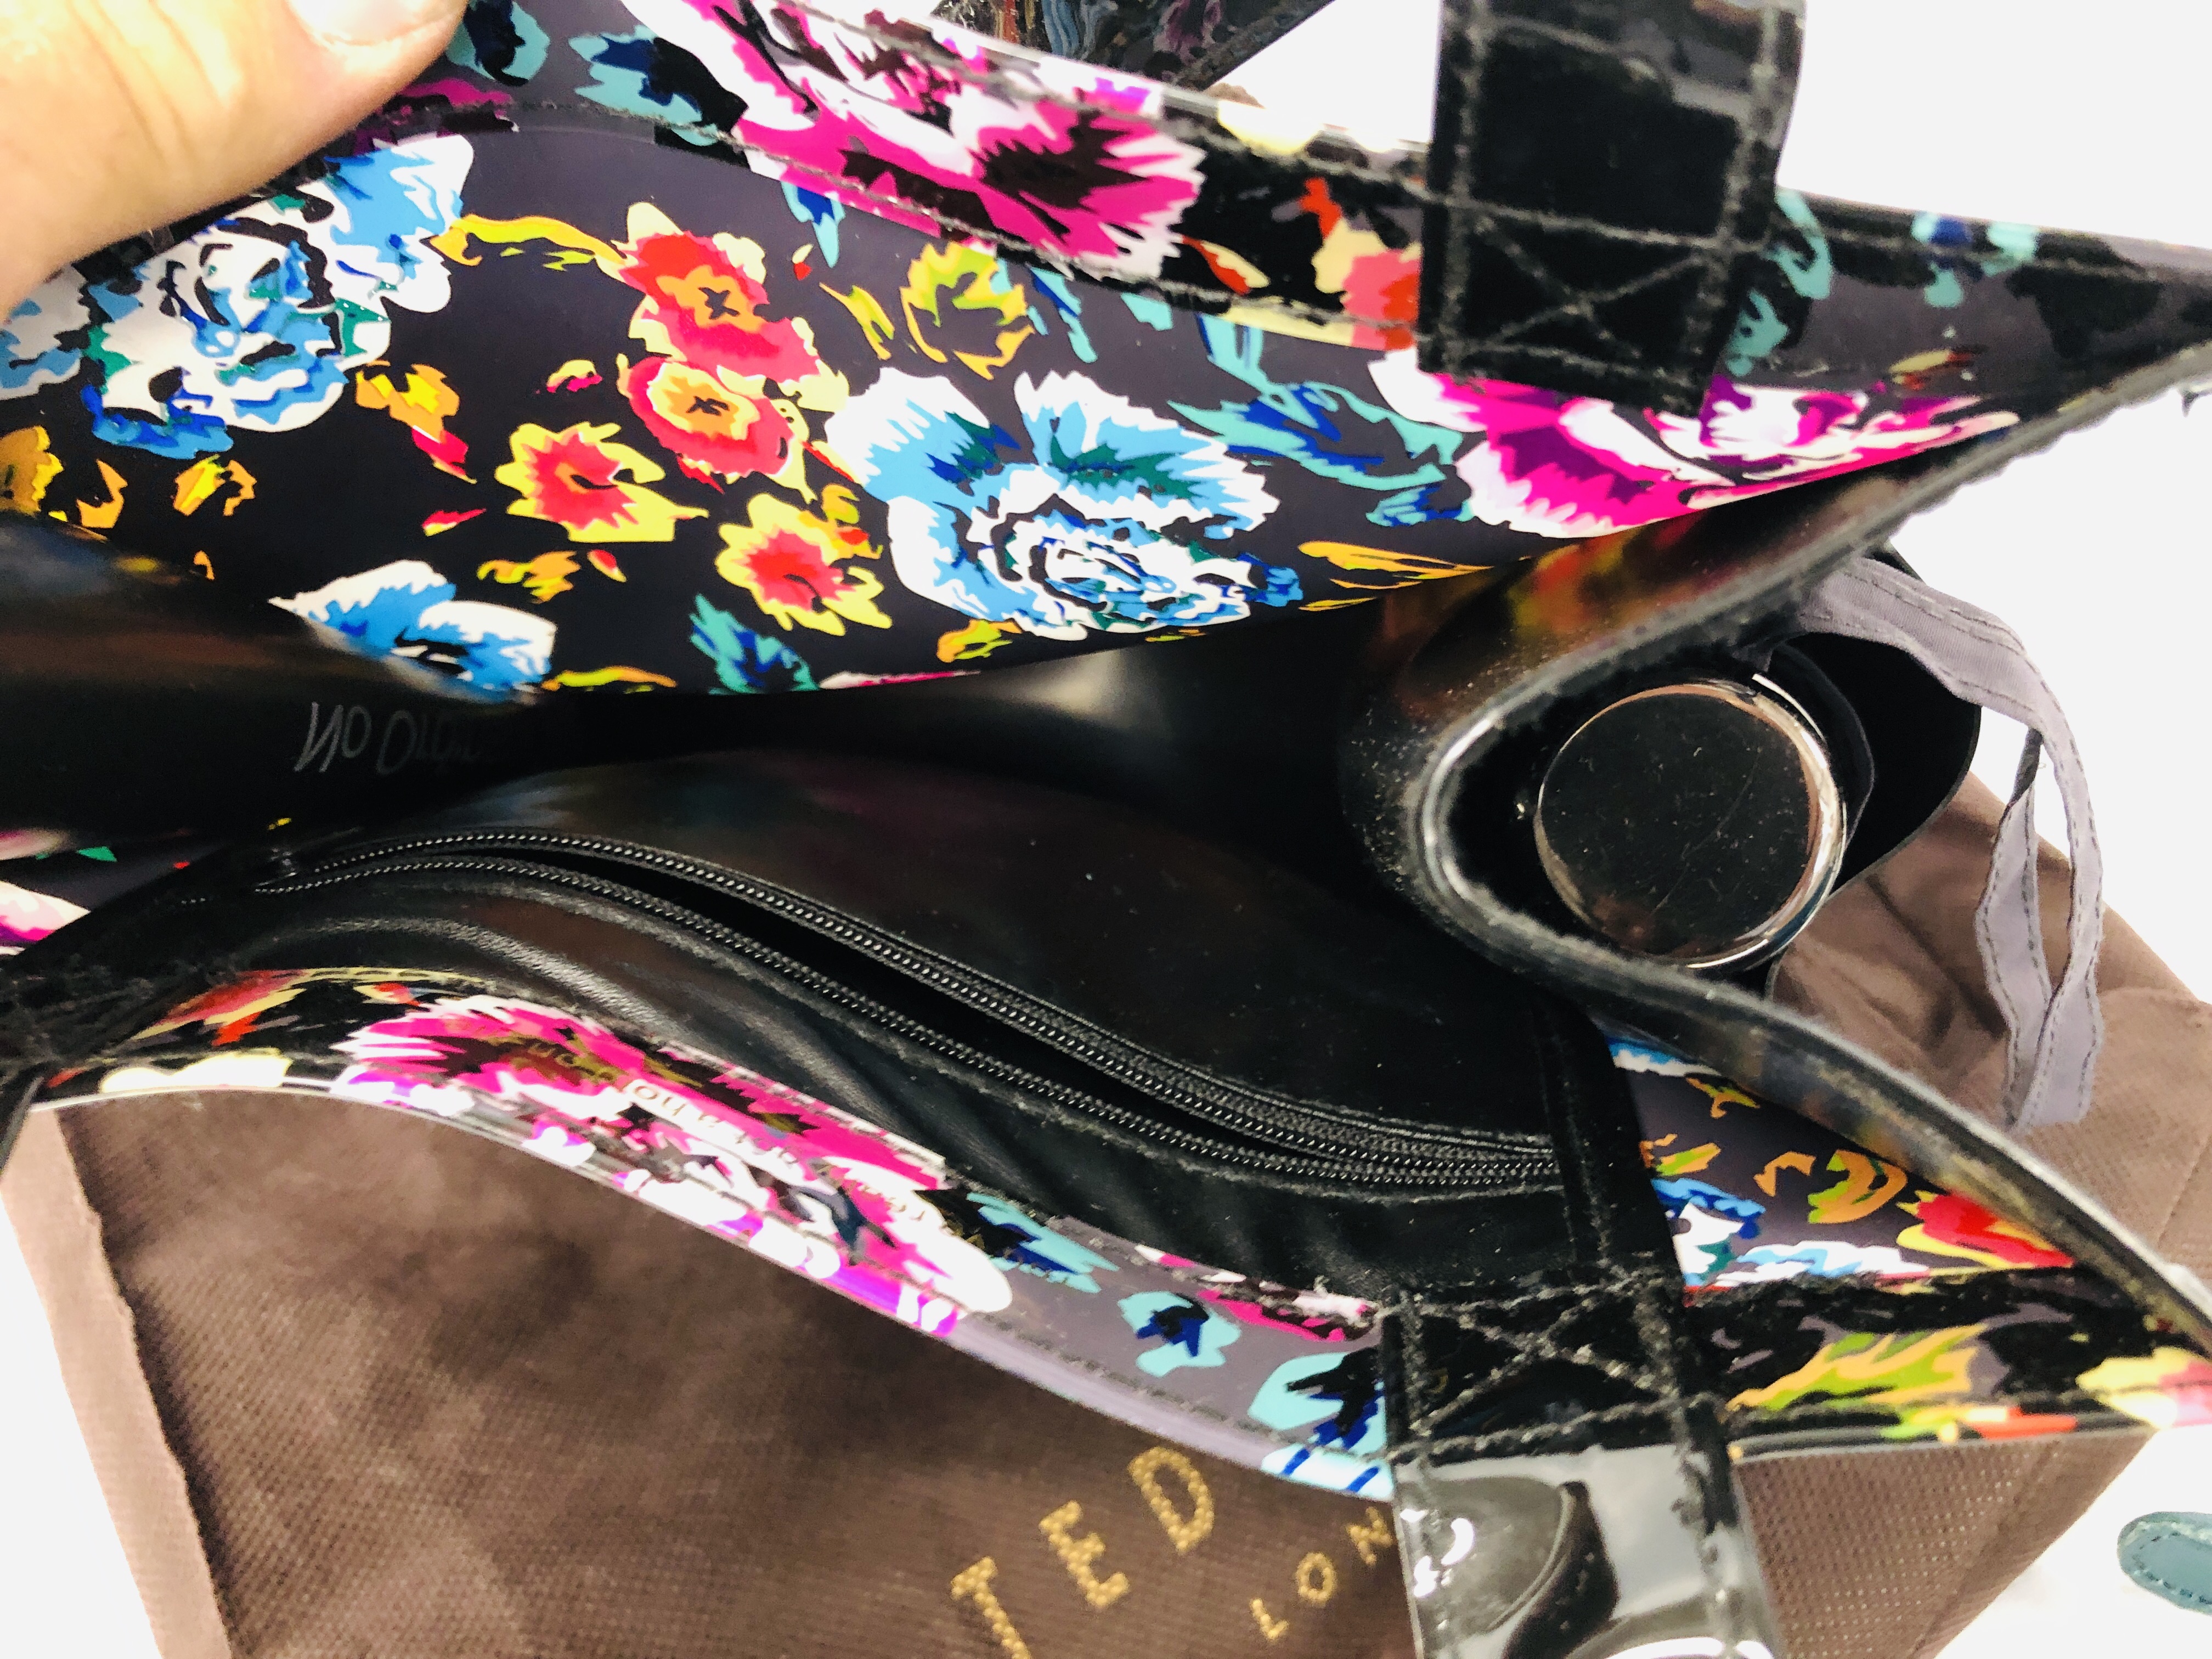 A BLUE SHOULDER BAG MARKED LO PLIAGE ALONG WITH FLORAL PATTERNED BAG AND UMBRELLA MARKED TED BAKER - Image 6 of 6